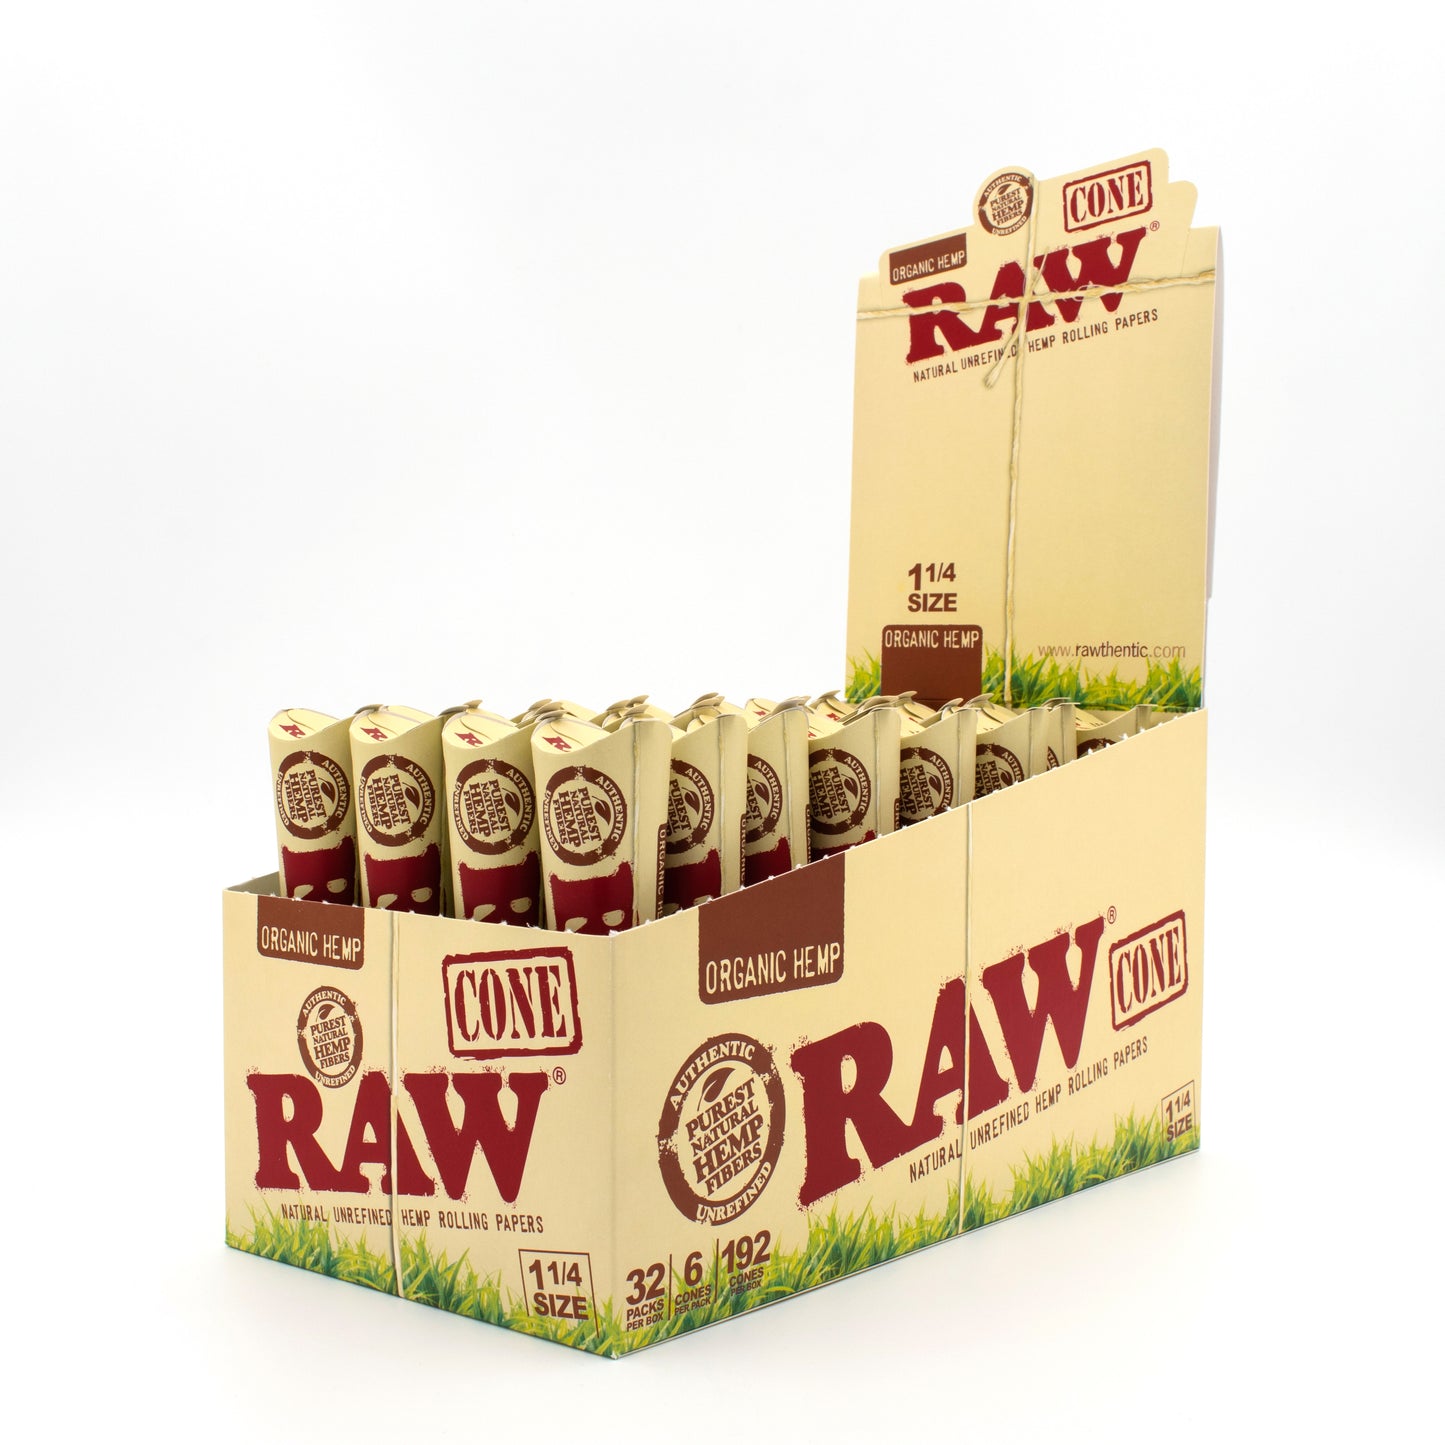 Rawthentic Rolling Paper 1-1/4 King Size Classic & Organic Cones